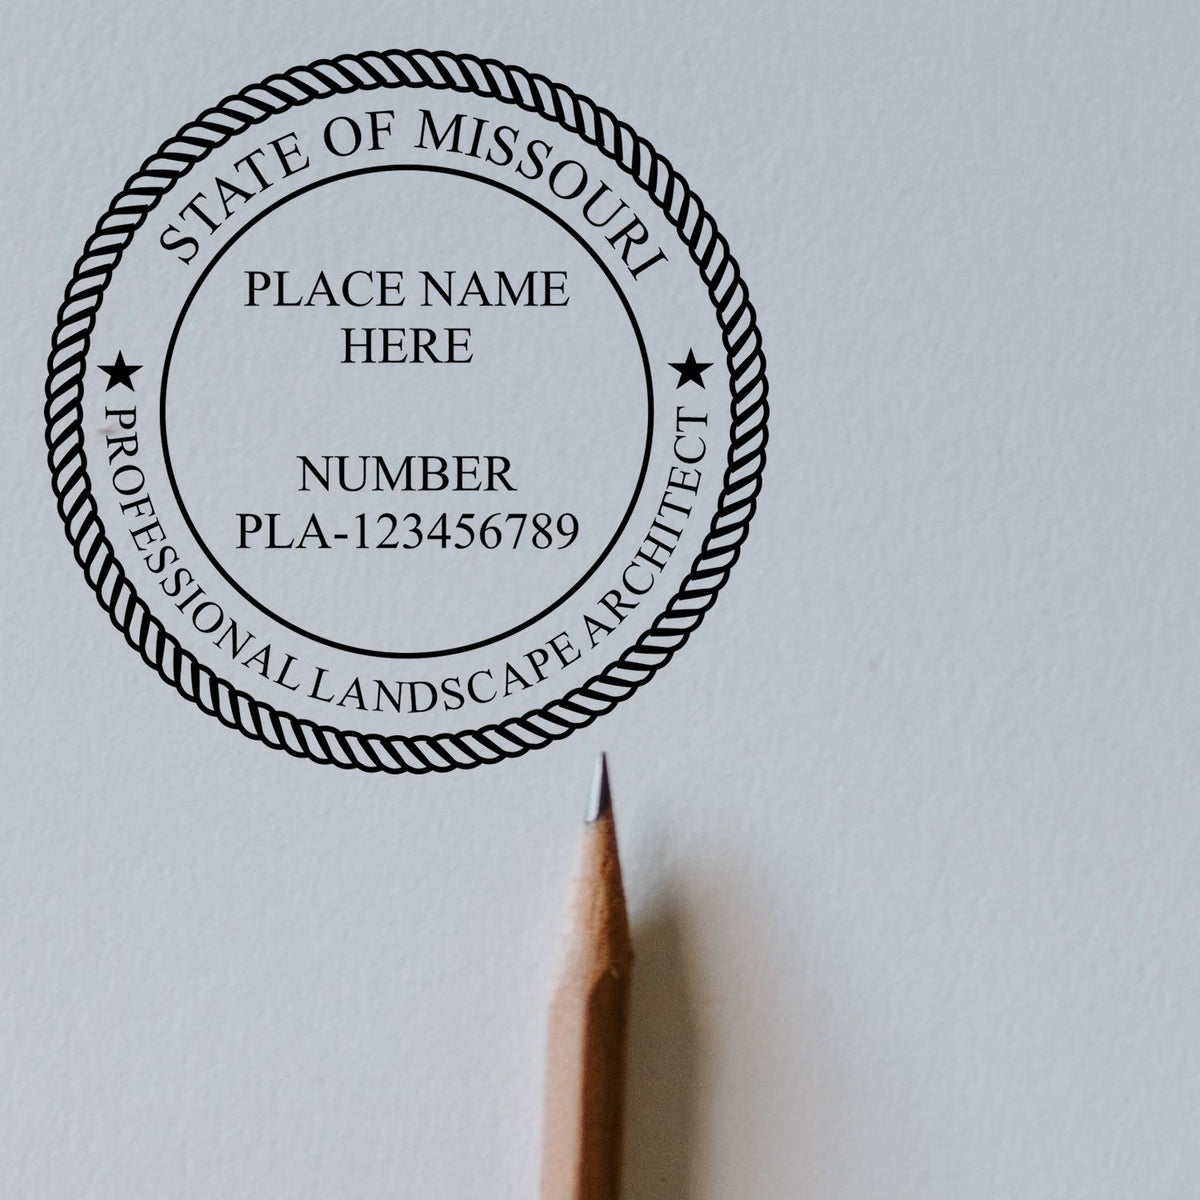 This paper is stamped with a sample imprint of the Missouri Landscape Architectural Seal Stamp, signifying its quality and reliability.